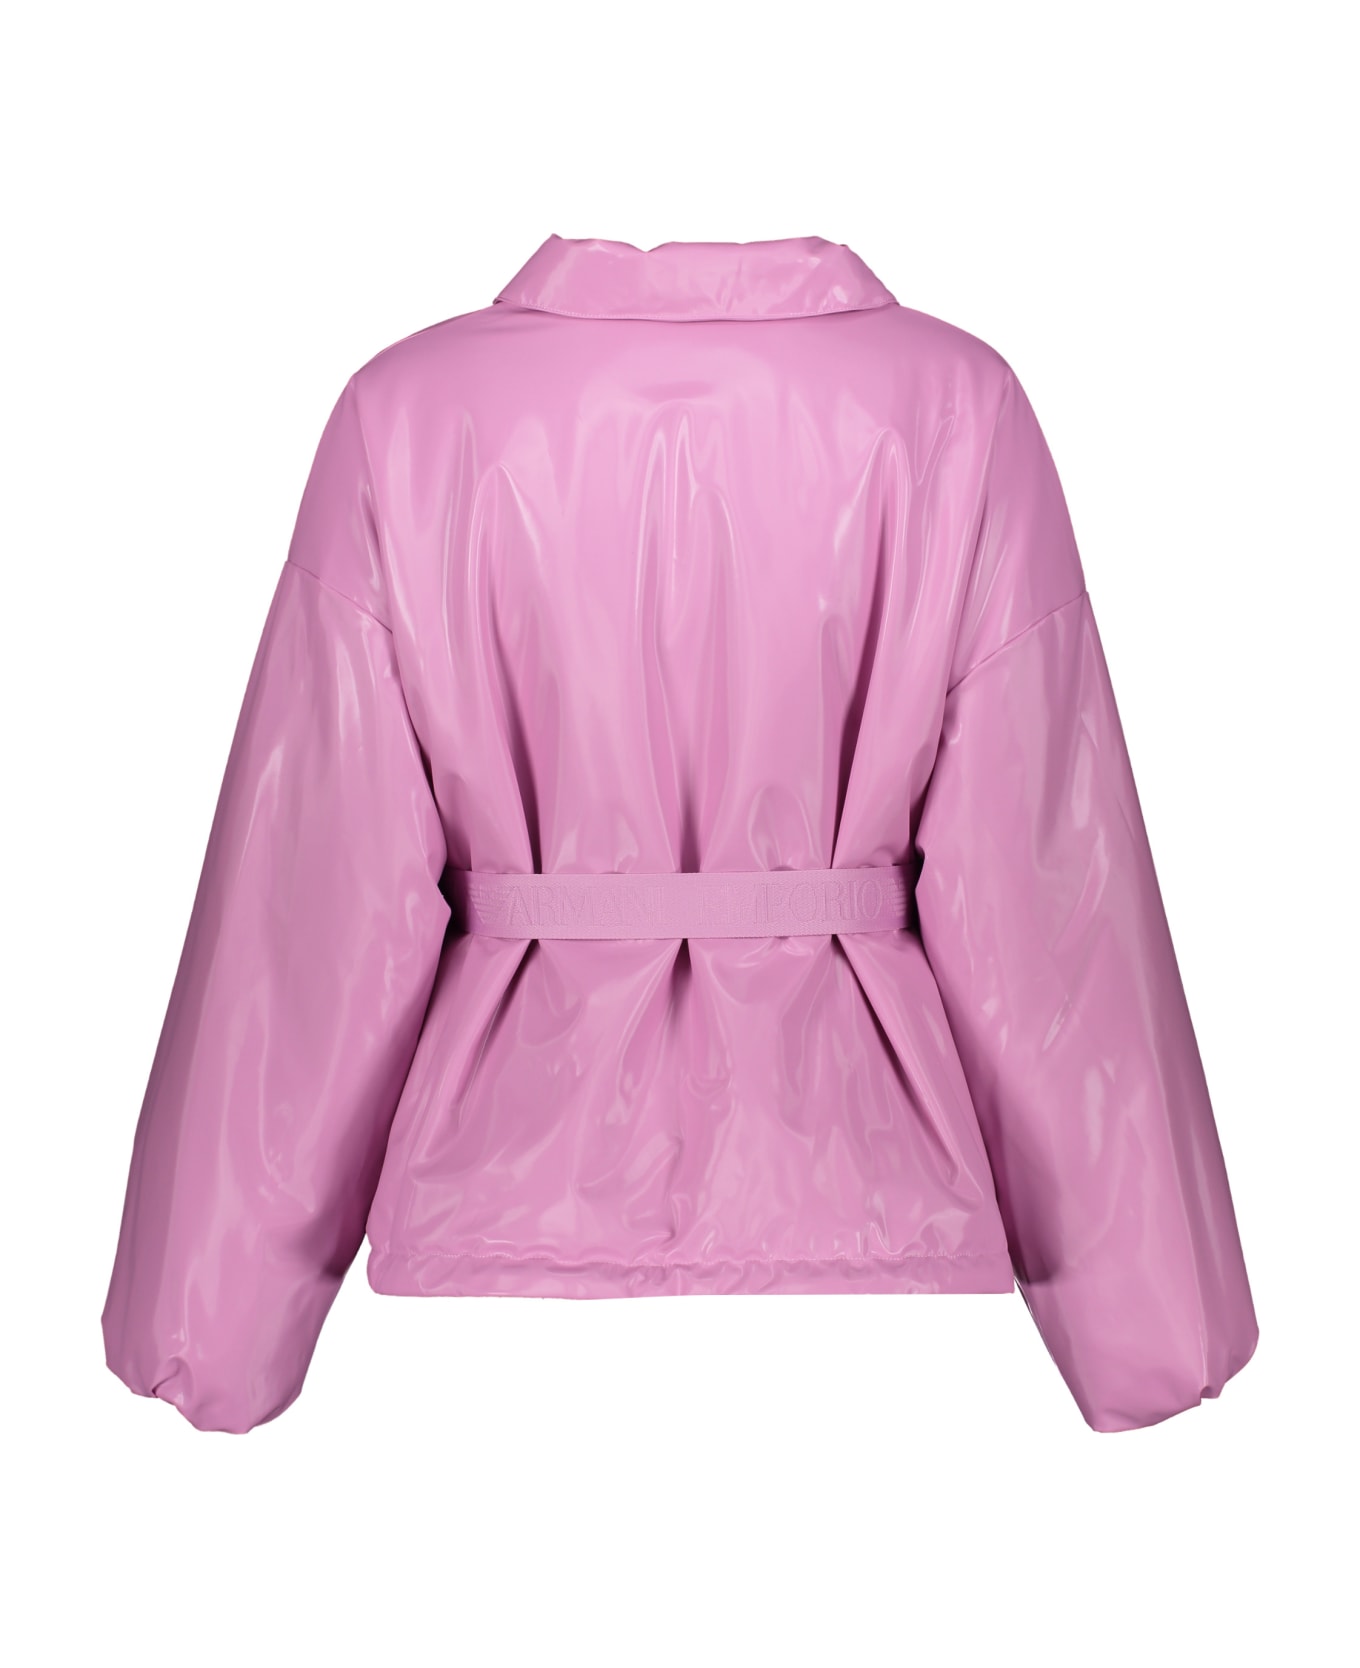 Emporio Armani Belted Full Zip Down Jacket - Pink レインコート